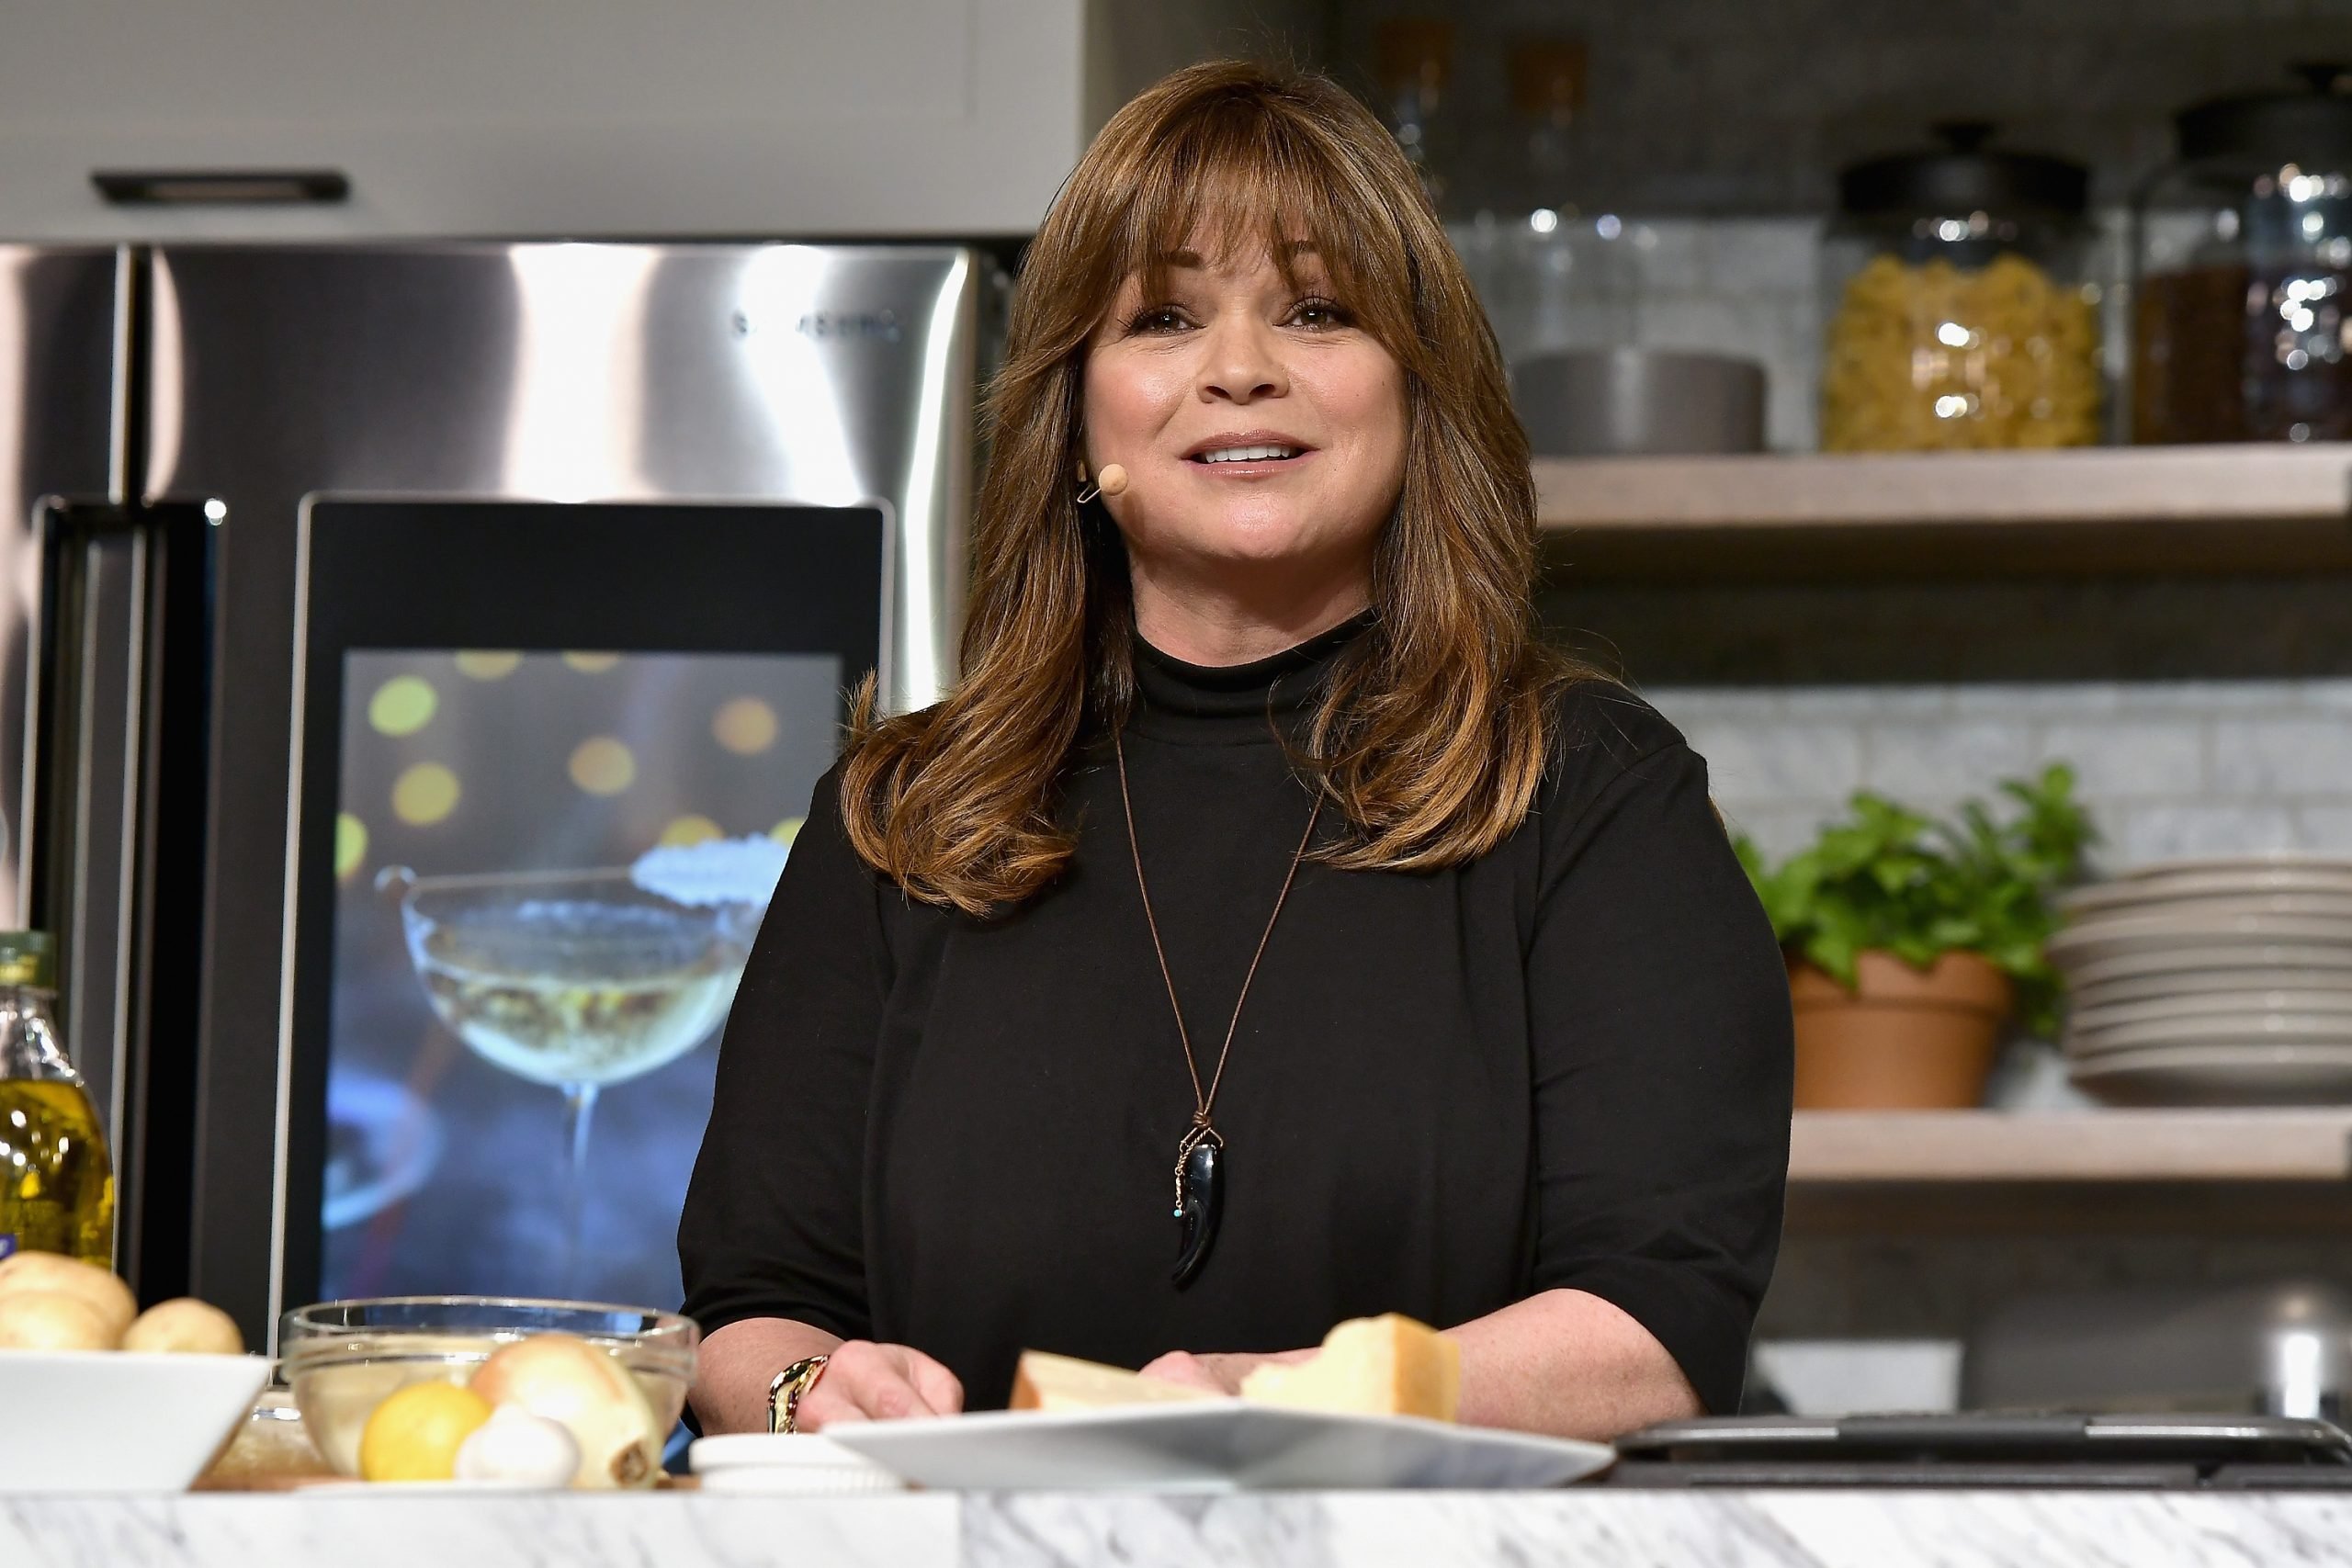 Actor and Food Network star Valerie Bertinelli